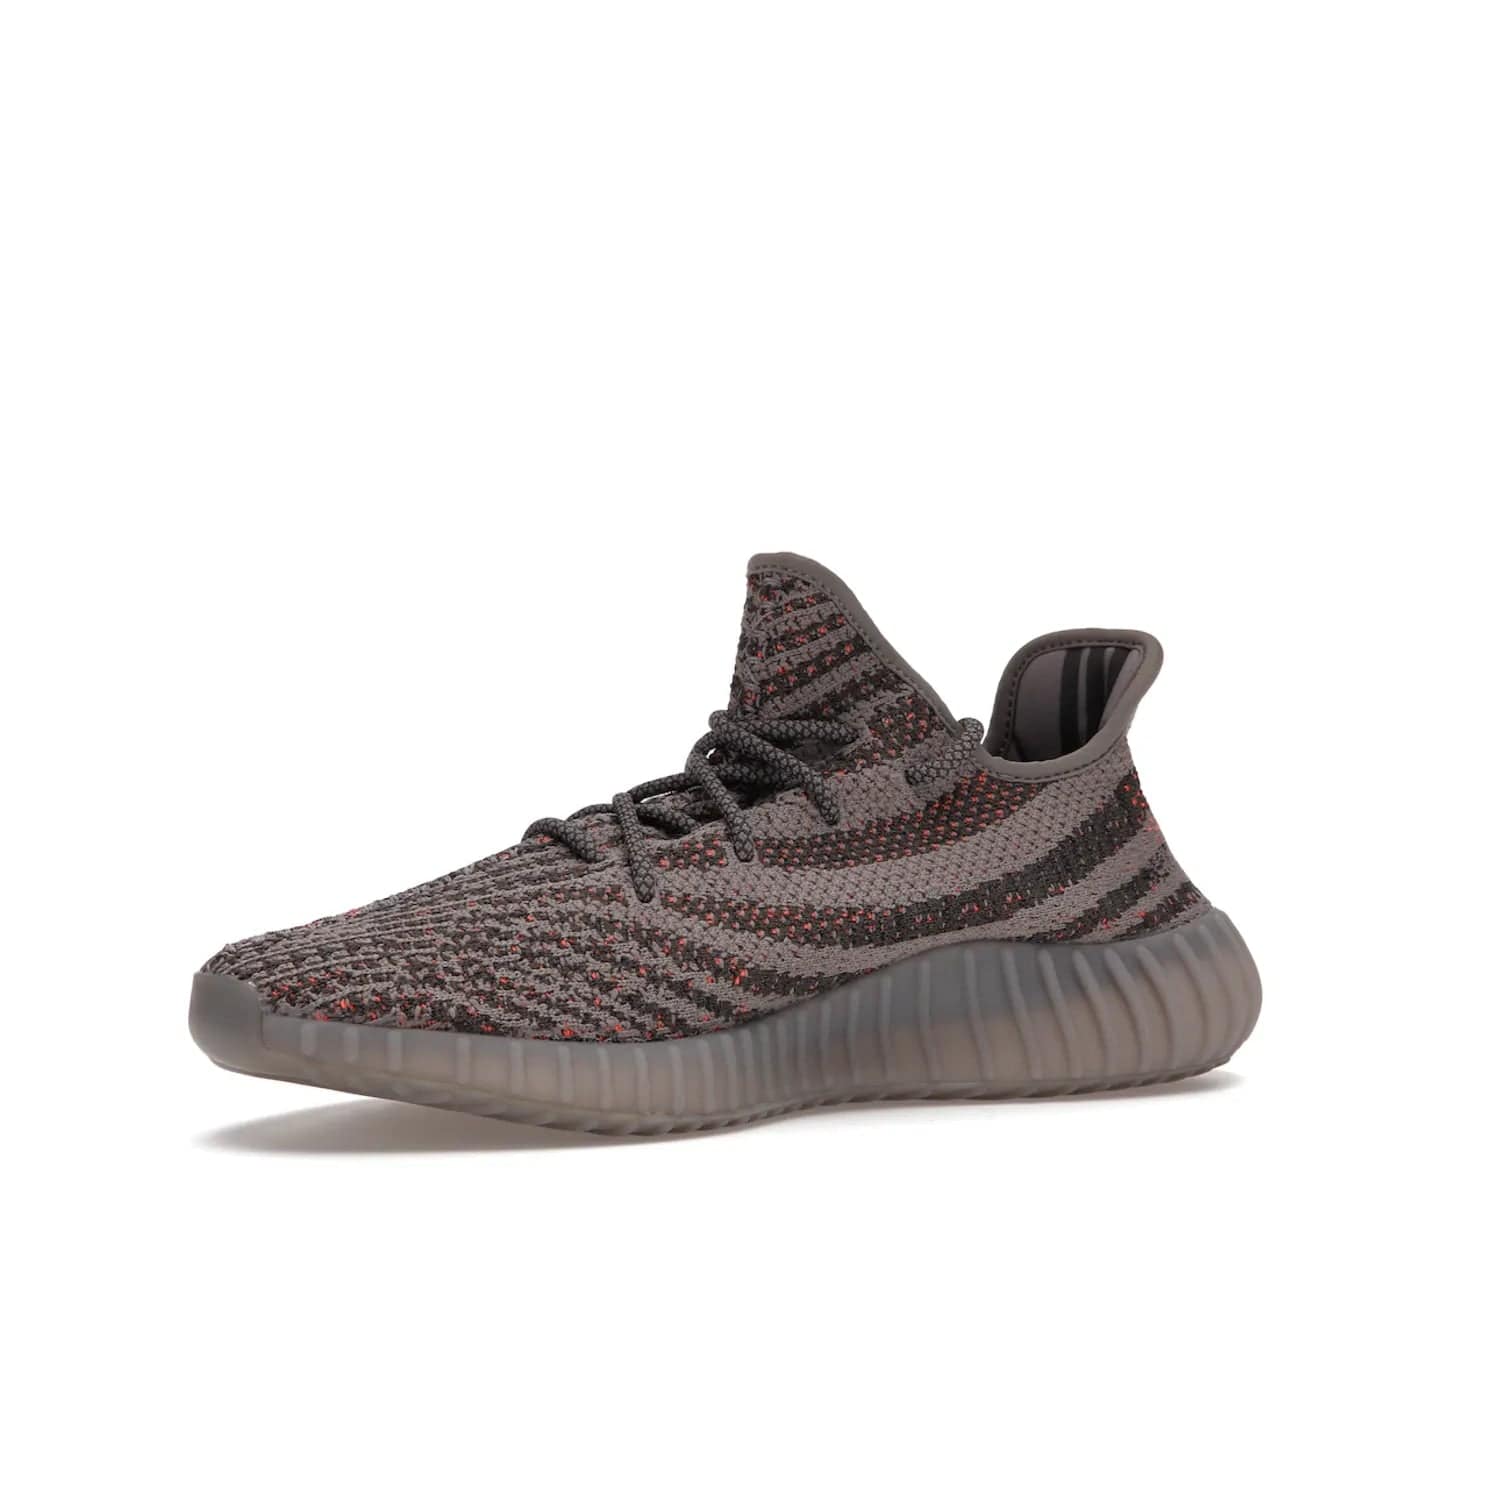 adidas Yeezy Boost 350 V2 Beluga Reflective - Image 16 - Only at www.BallersClubKickz.com - Shop the adidas Yeezy Boost 350 V2 Beluga Reflective: a stylish, reflective sneaker that stands out. Featuring Boost sole, Primeknit upper & signature orange stripe. Available Dec 2021.